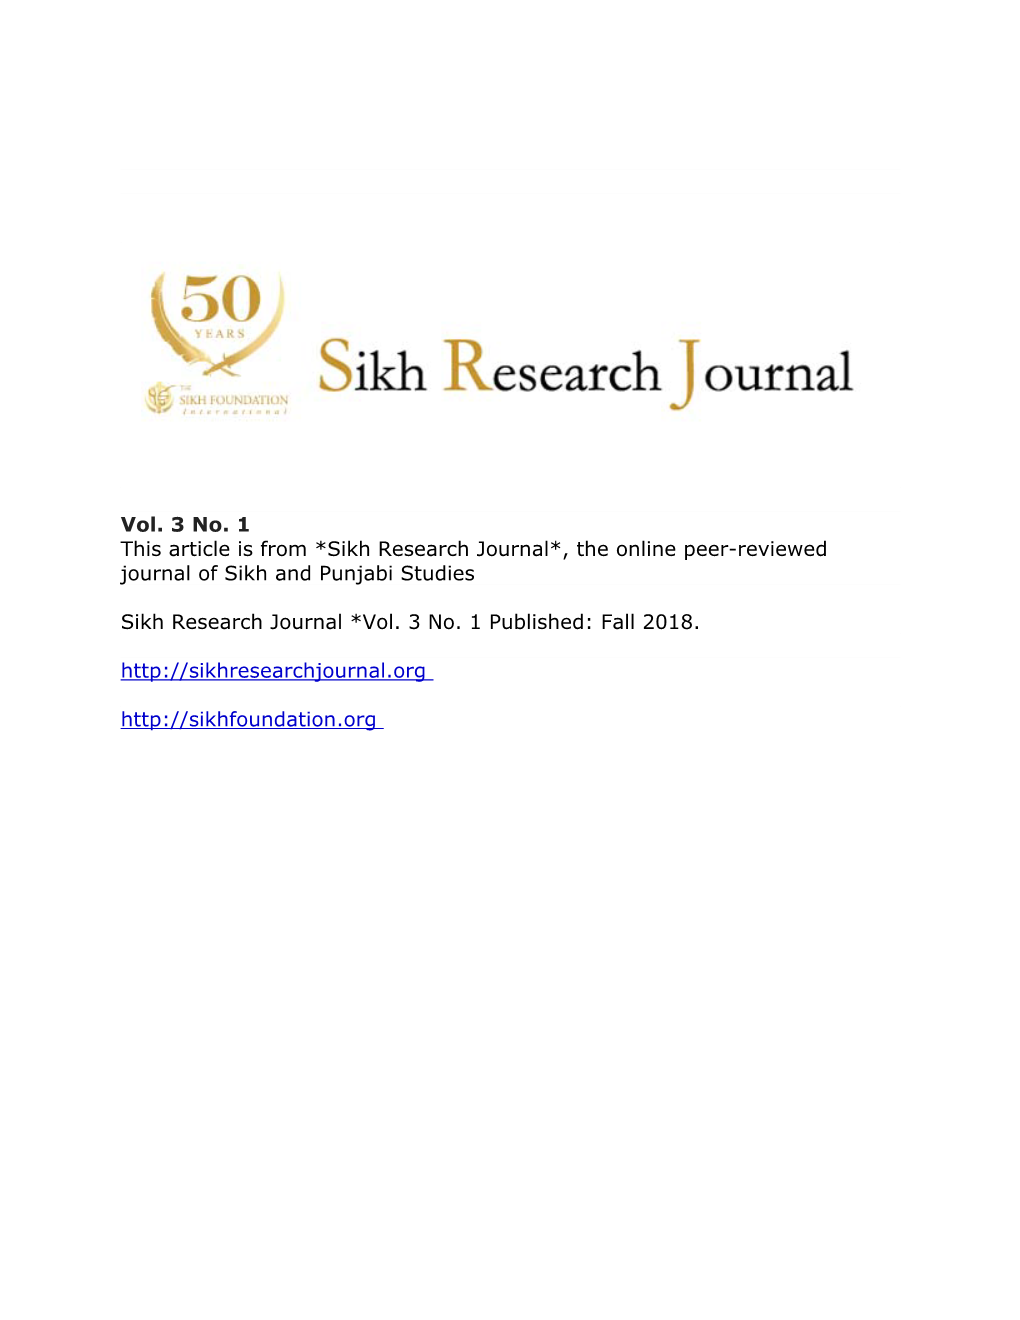 Vol. 3 No. 1 This Article Is from *Sikh Research Journal*, the Online Peer-Reviewed Journal of Sikh and Punjabi Studies